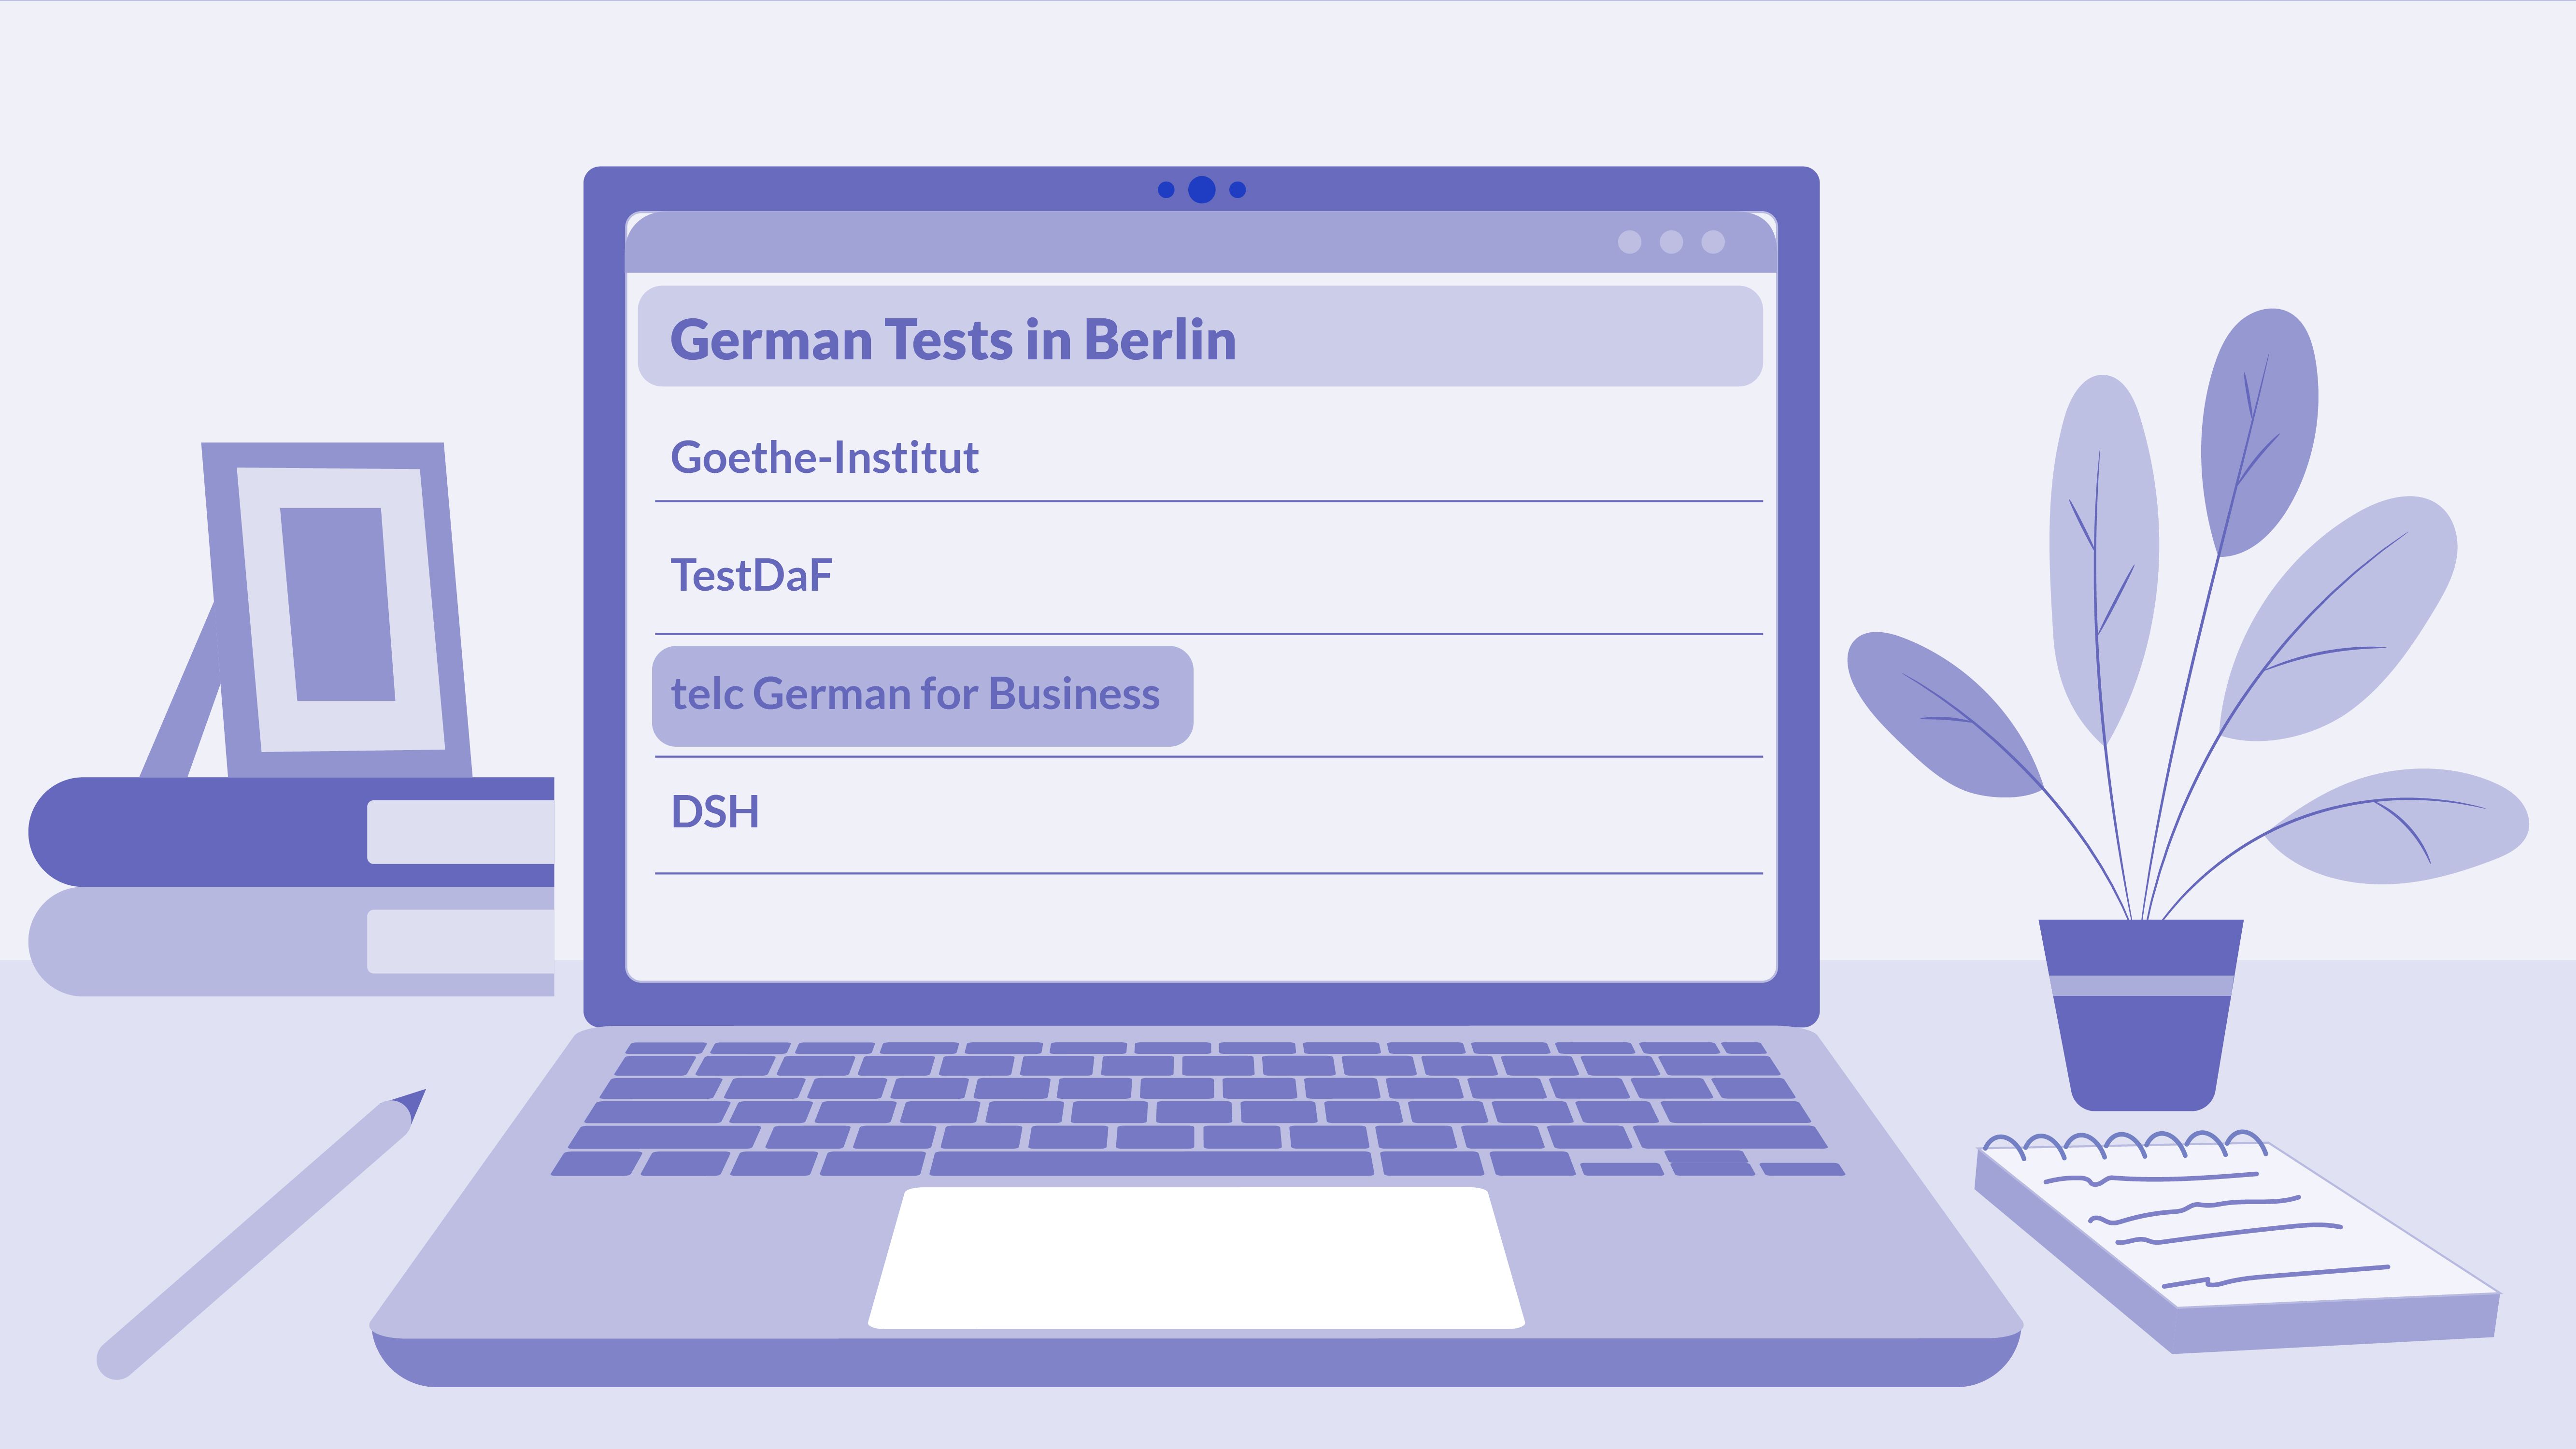 Same search results page, with the “telc German for Business” test clicked on.